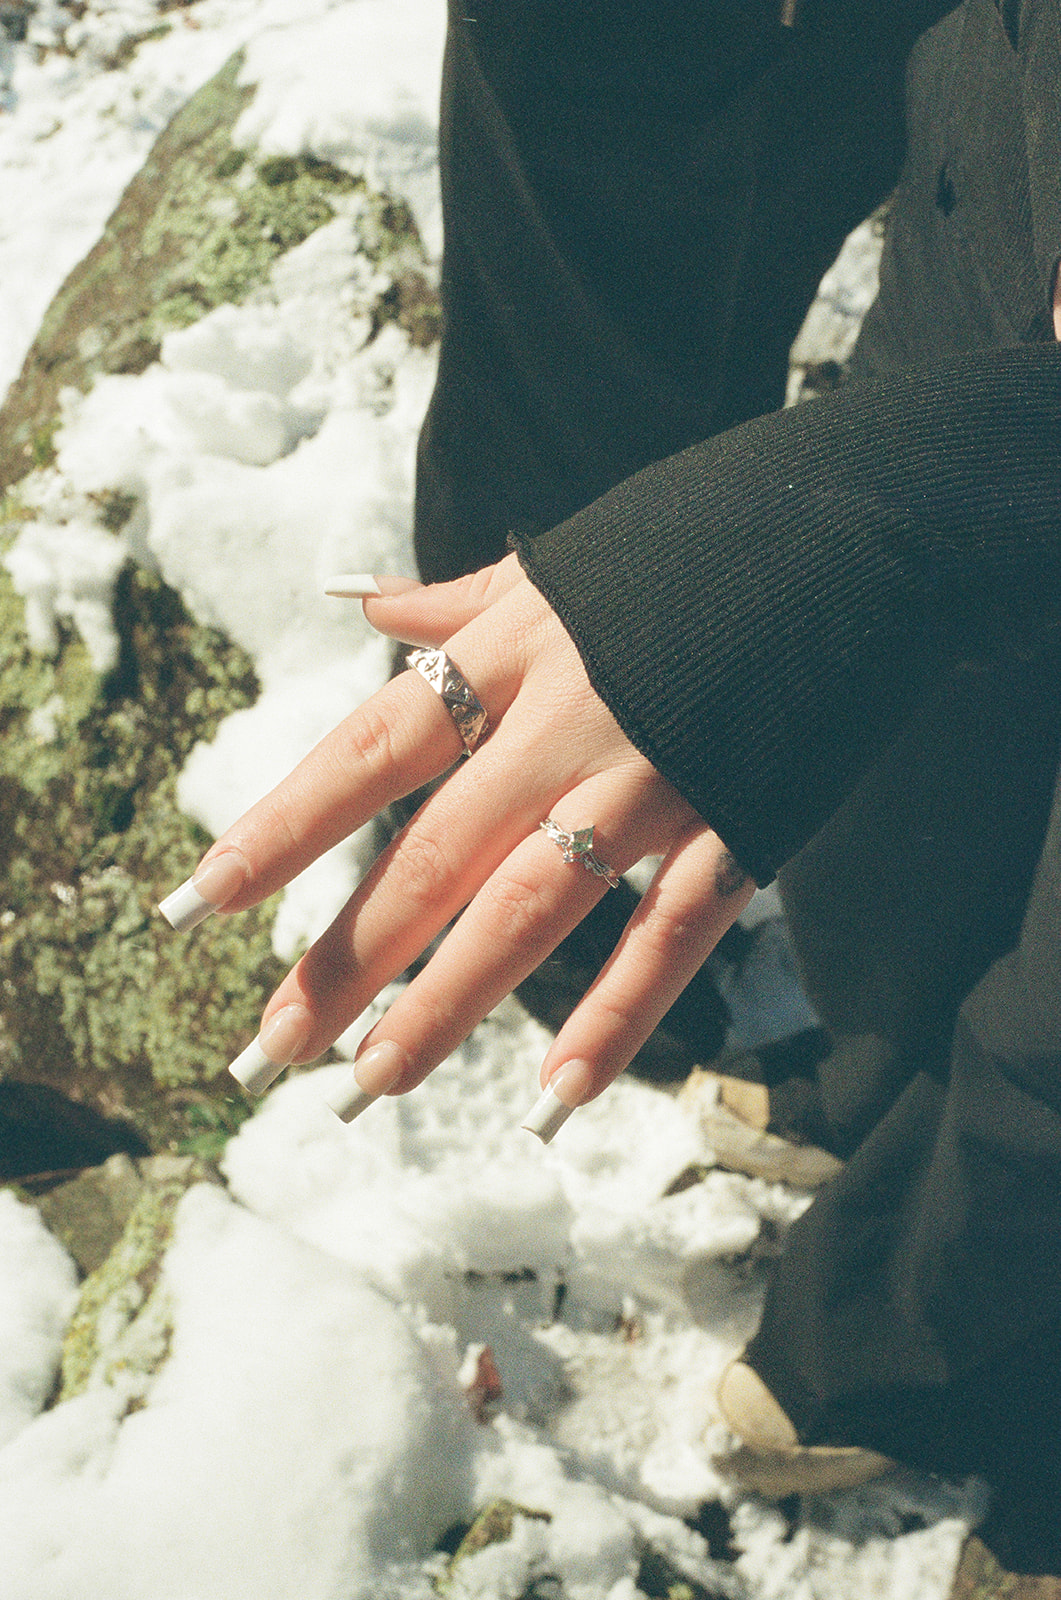 nontraditional engagement rings earthy edgy 35mm film engagement photographer brianna kirk photography 